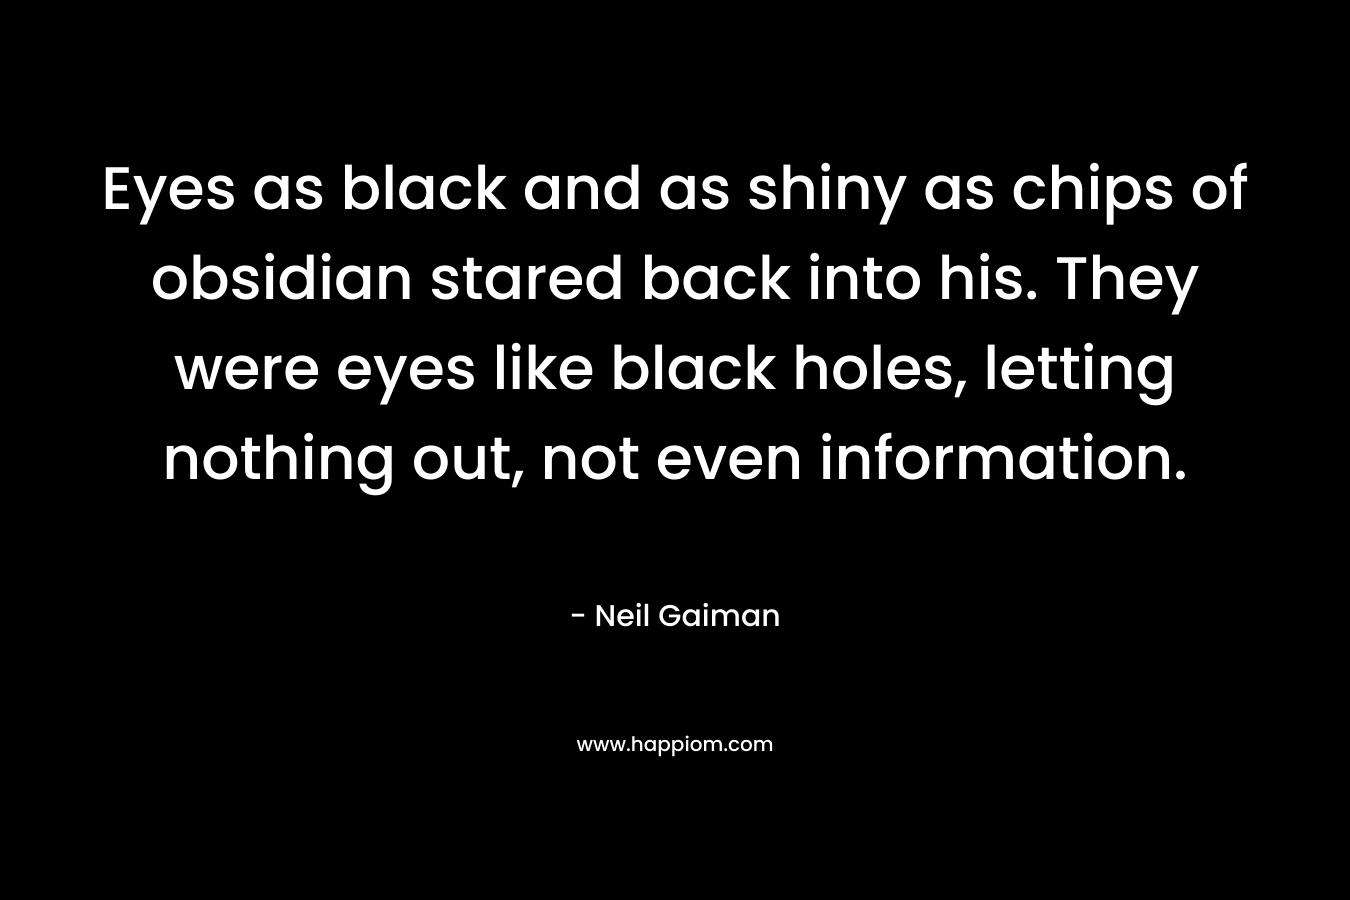 Eyes as black and as shiny as chips of obsidian stared back into his. They were eyes like black holes, letting nothing out, not even information. – Neil Gaiman